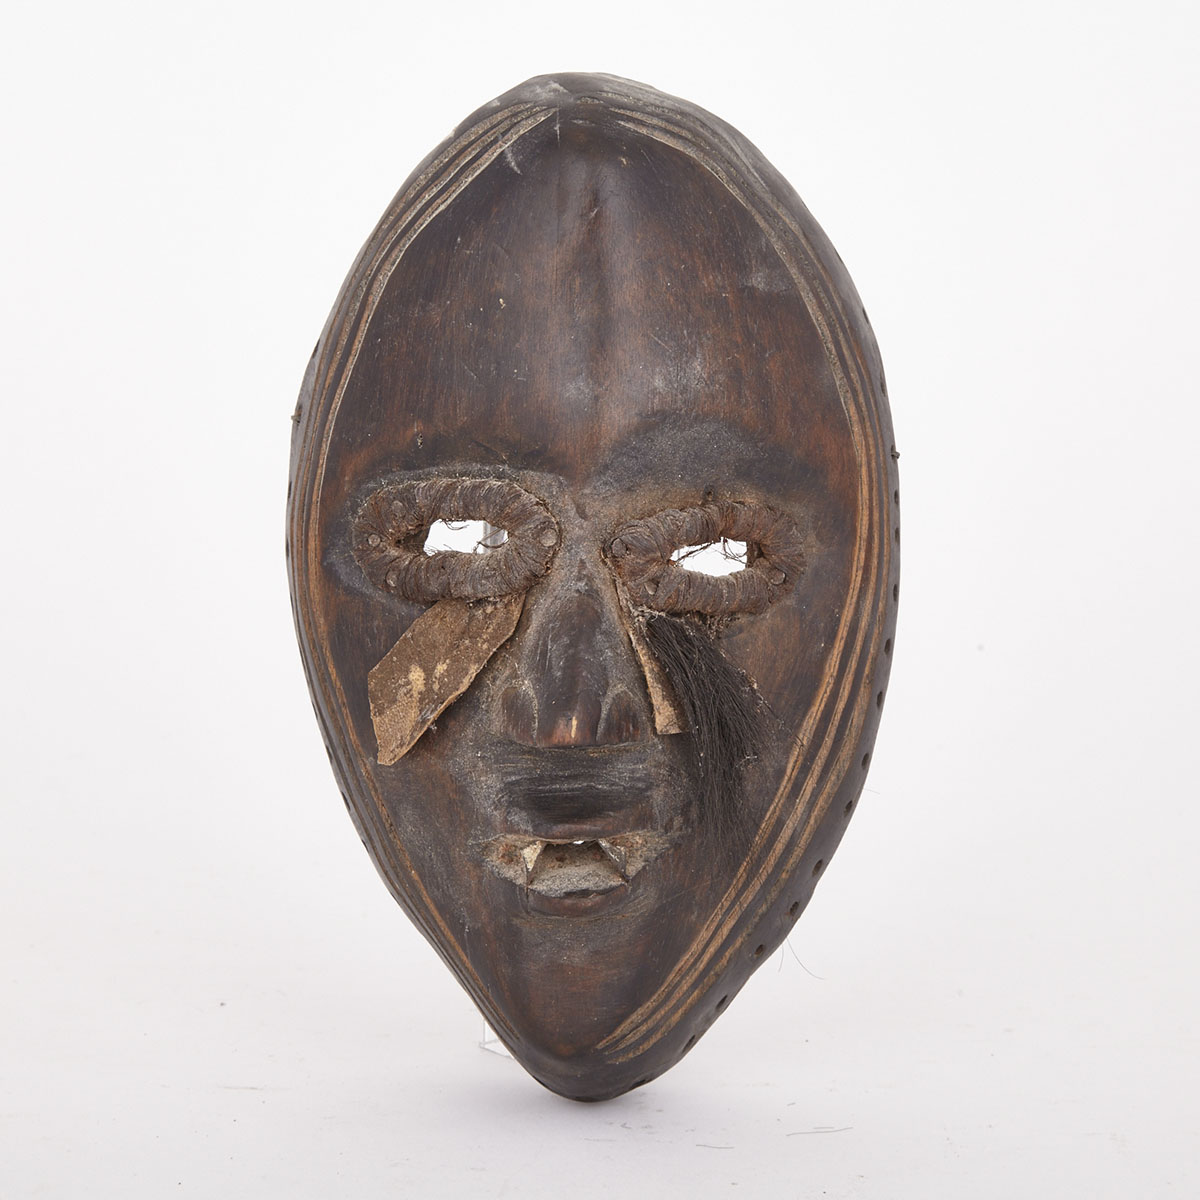 Dan Carved Wood Mask with applied hair, hide and metal decoration, West Africa, 20th century